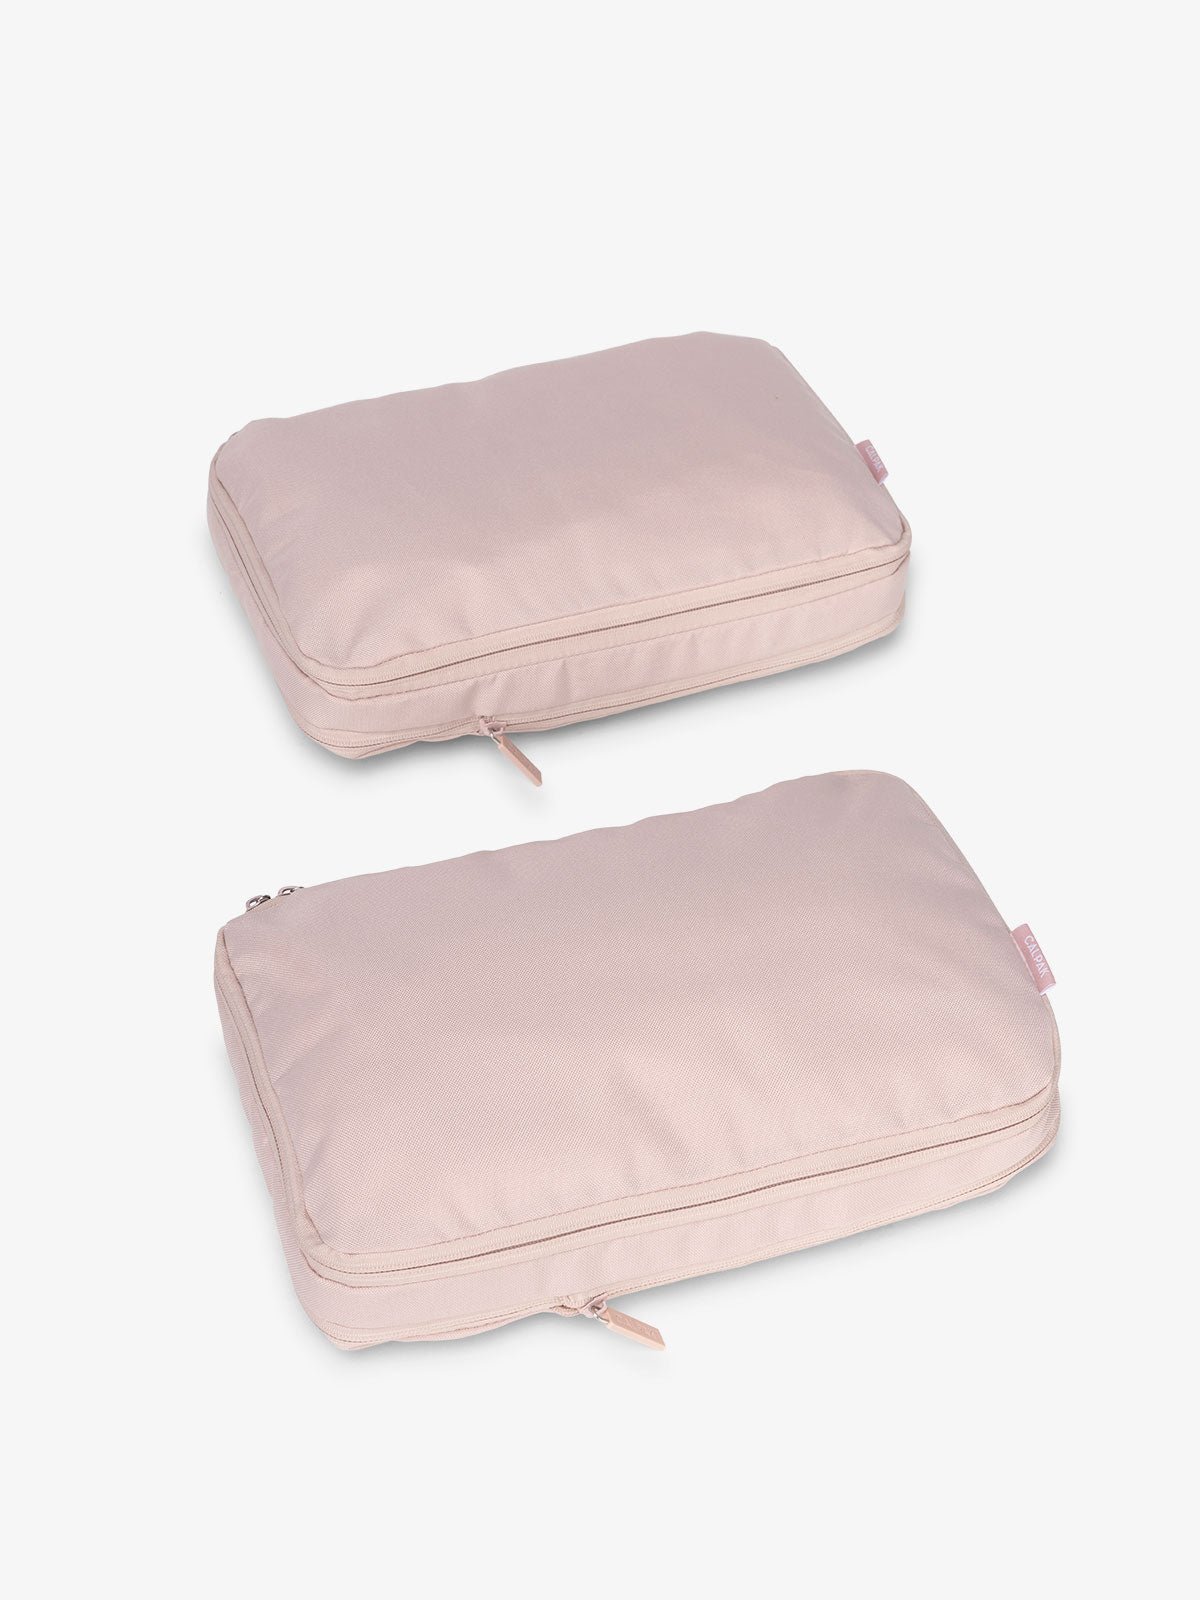 CALPAK compression packing cubes in pink sand